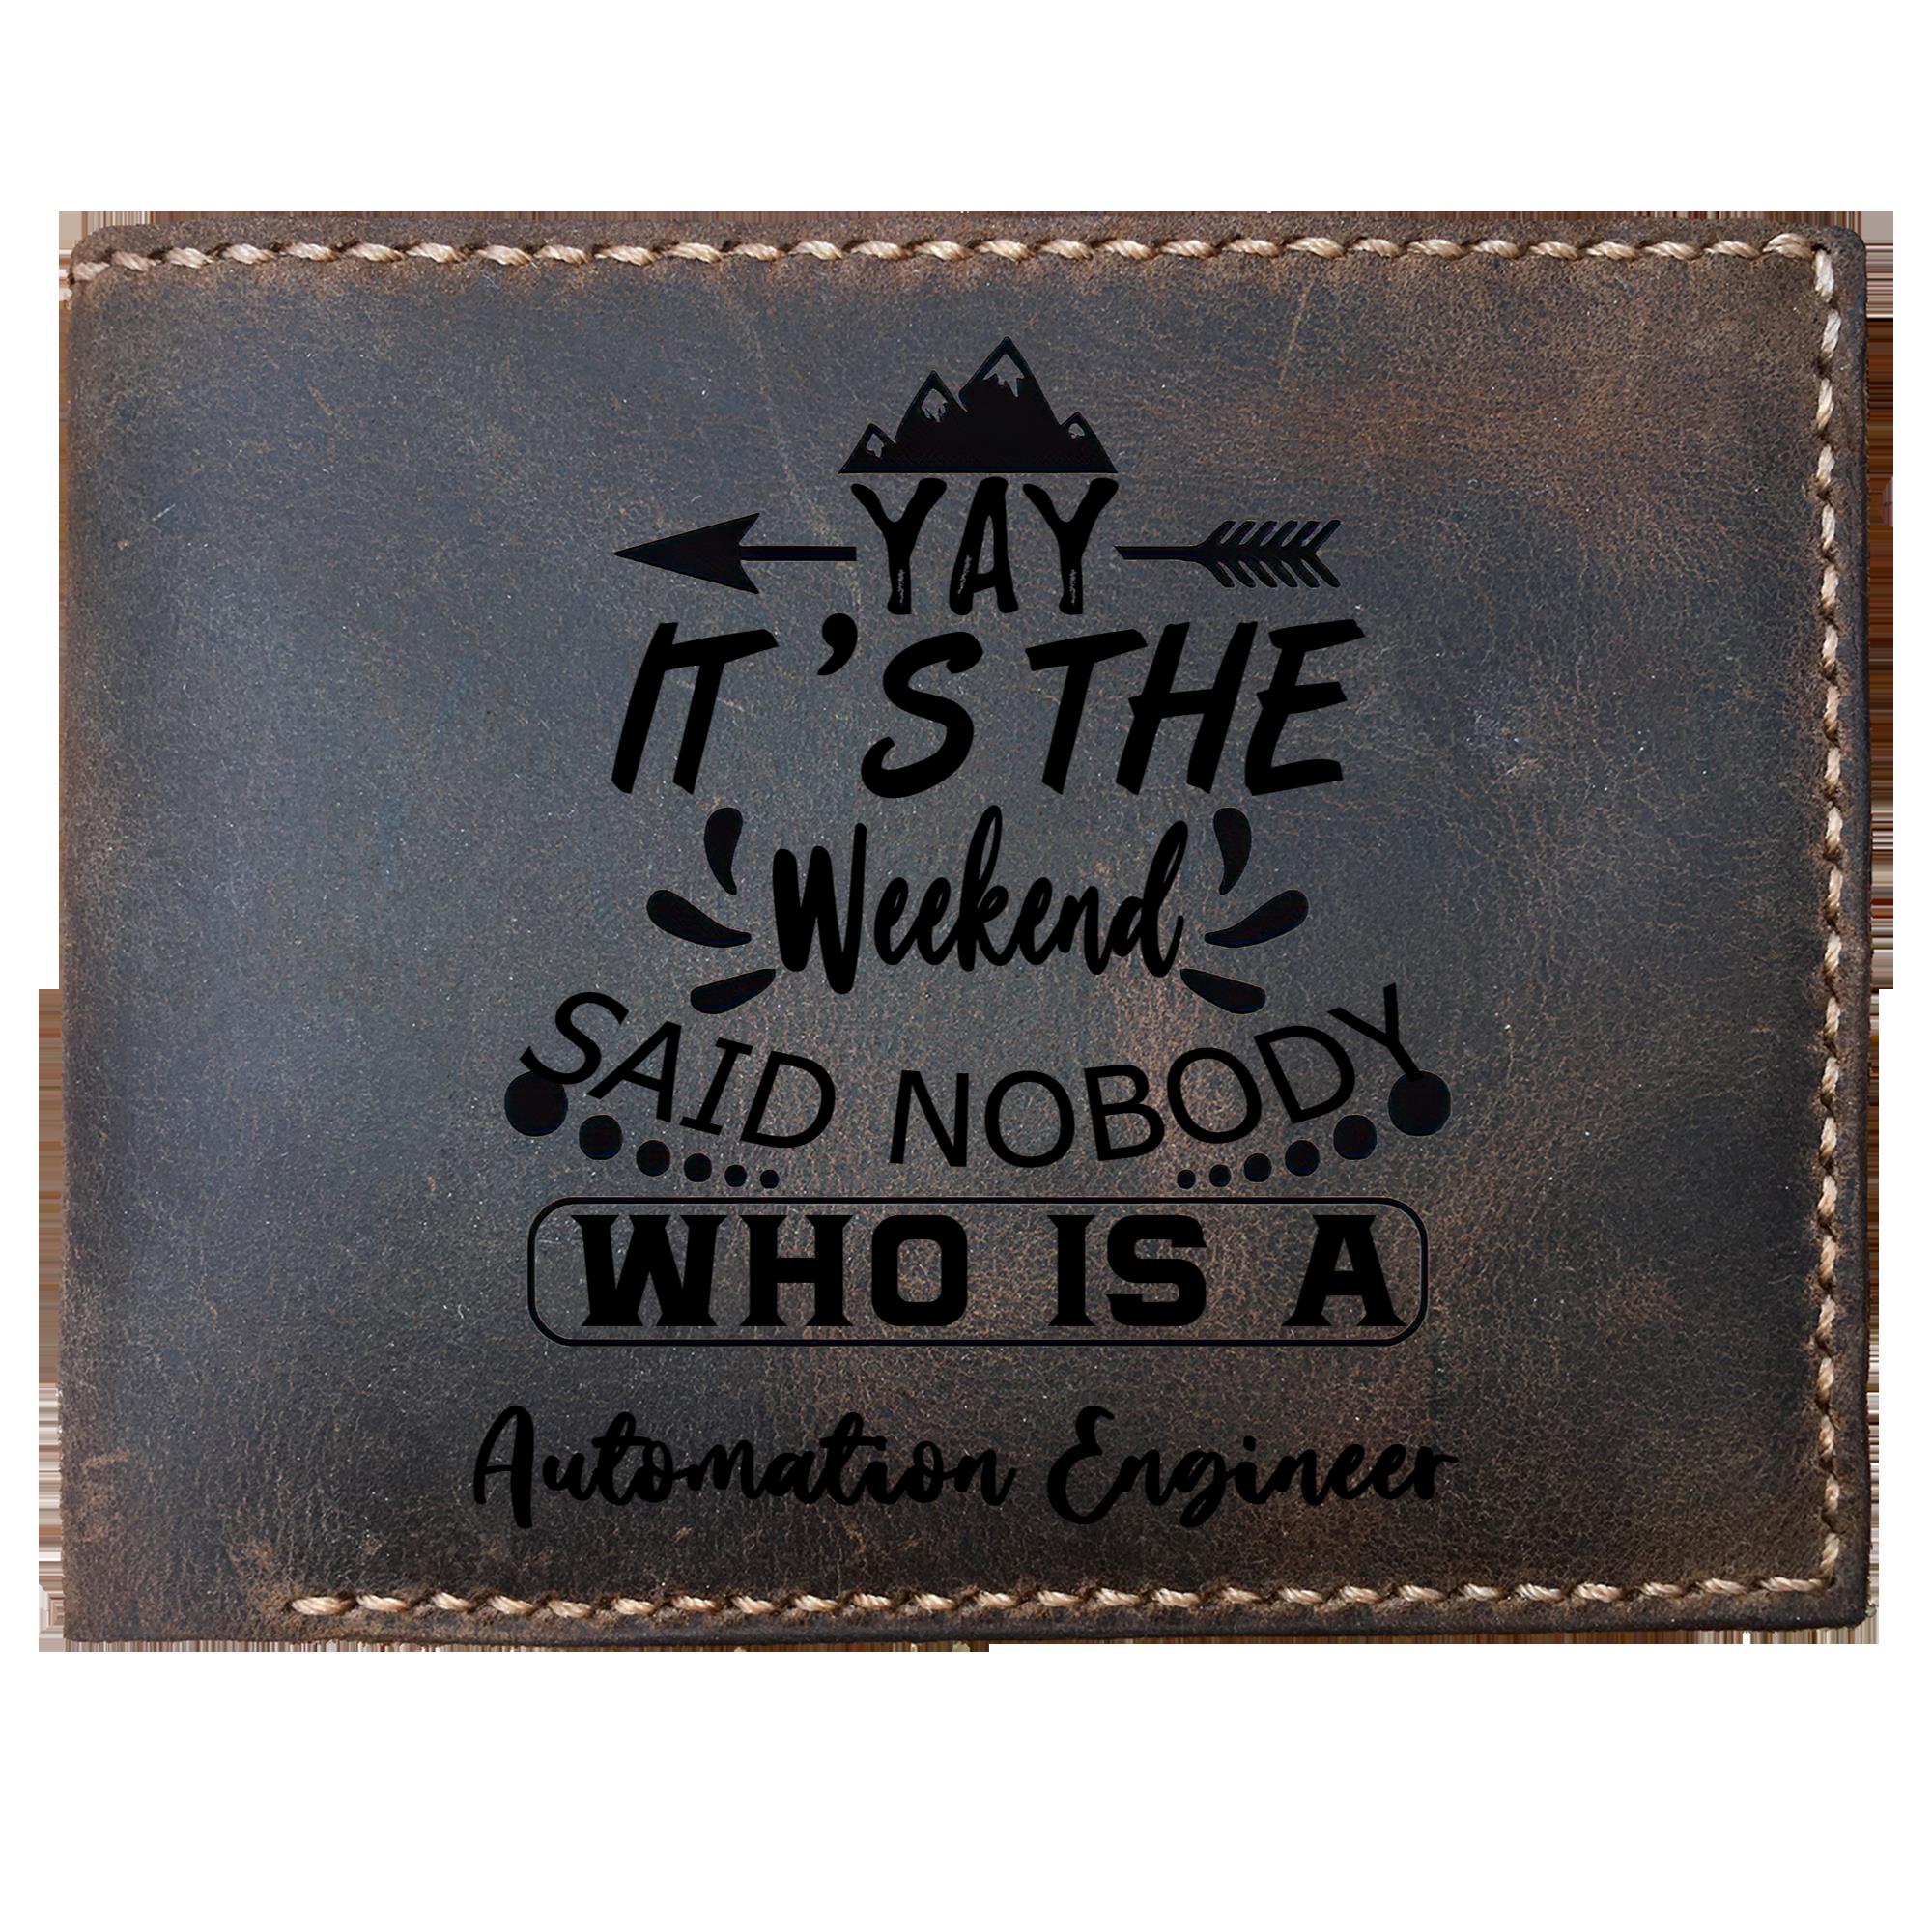 Skitongifts Funny Custom Laser Engraved Bifold Leather Wallet For Men, It's The Weekend Said Nobody Who Is A Automation Engineer, Father's Day Gifts